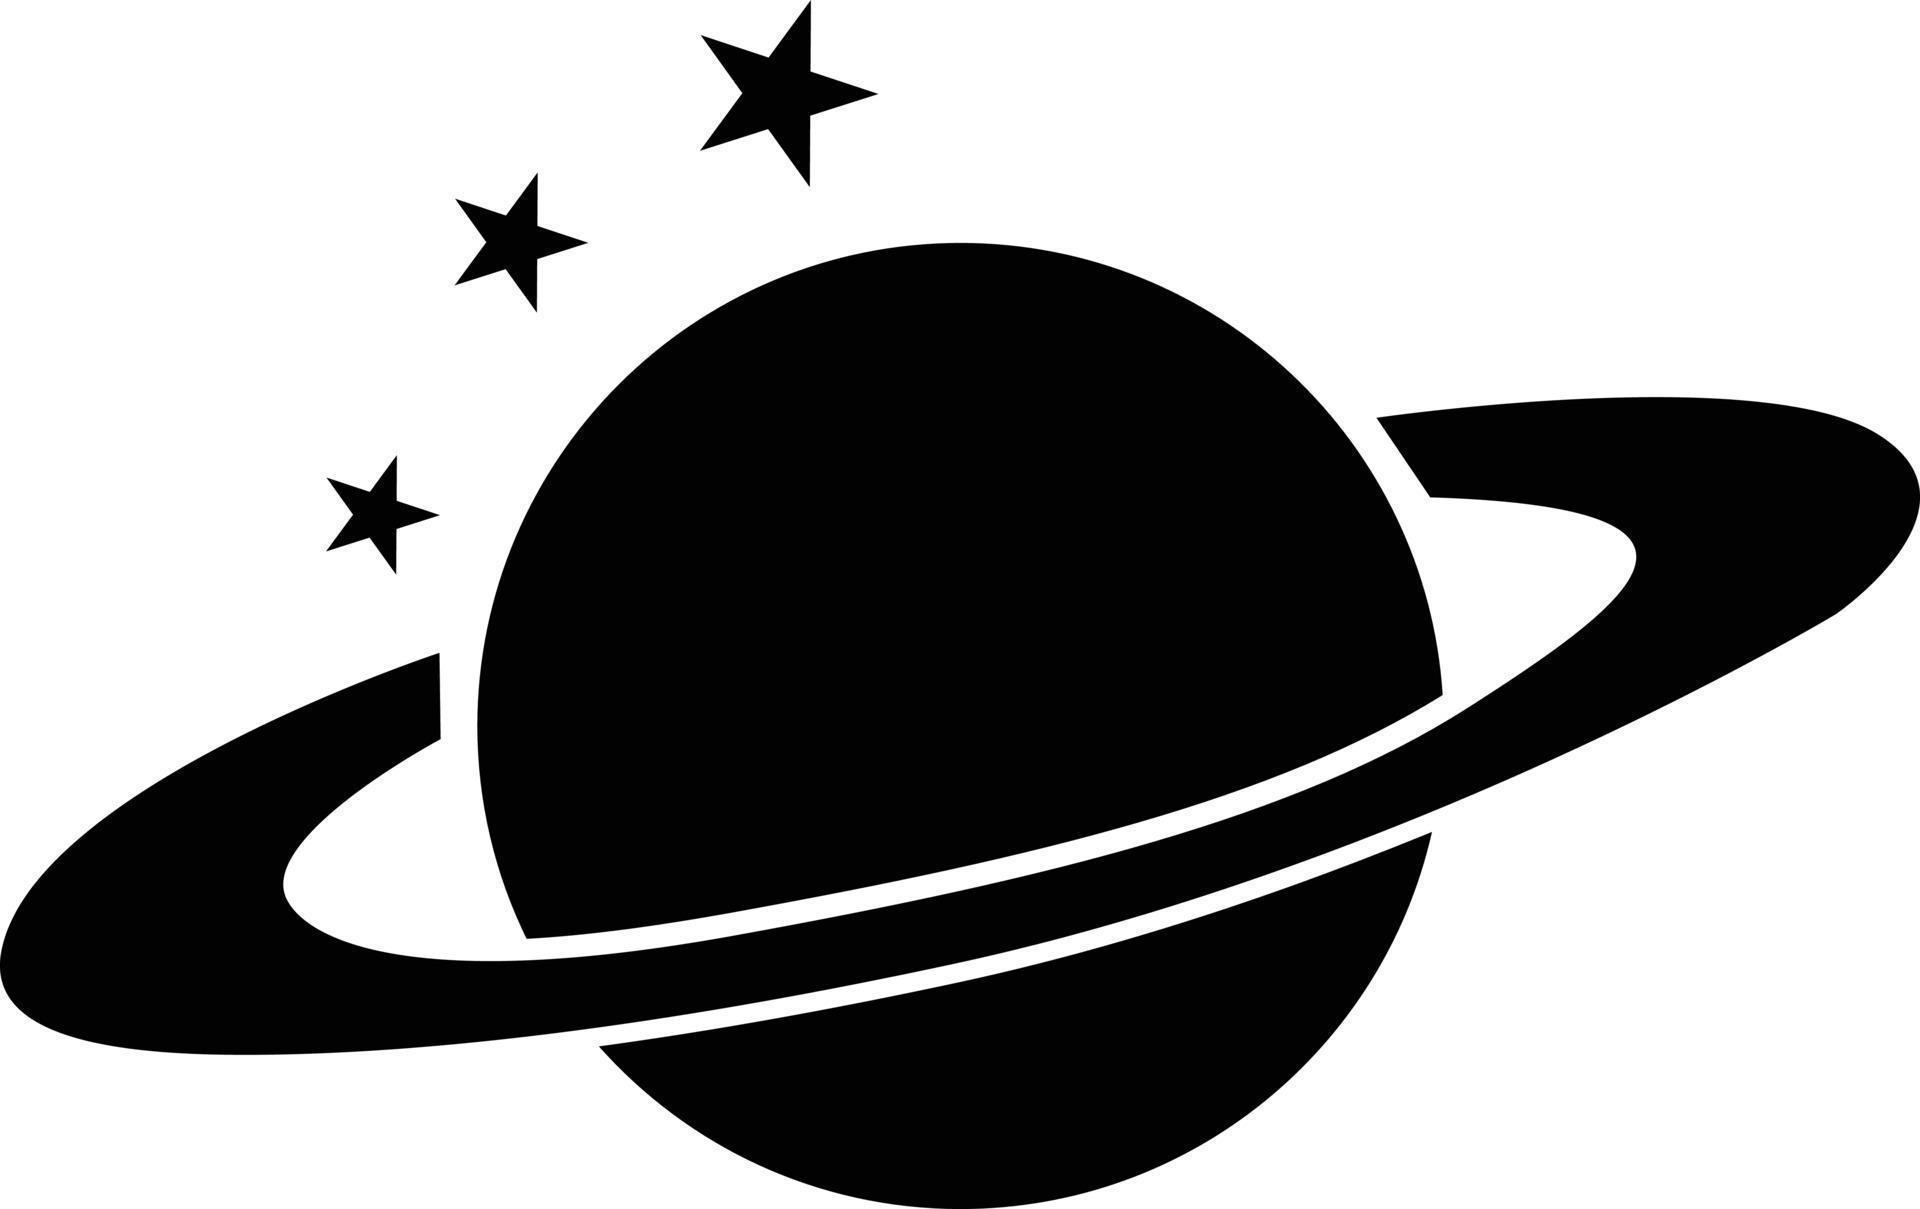 planet saturn icon on white background. saturn sign. galaxy space. flat ...